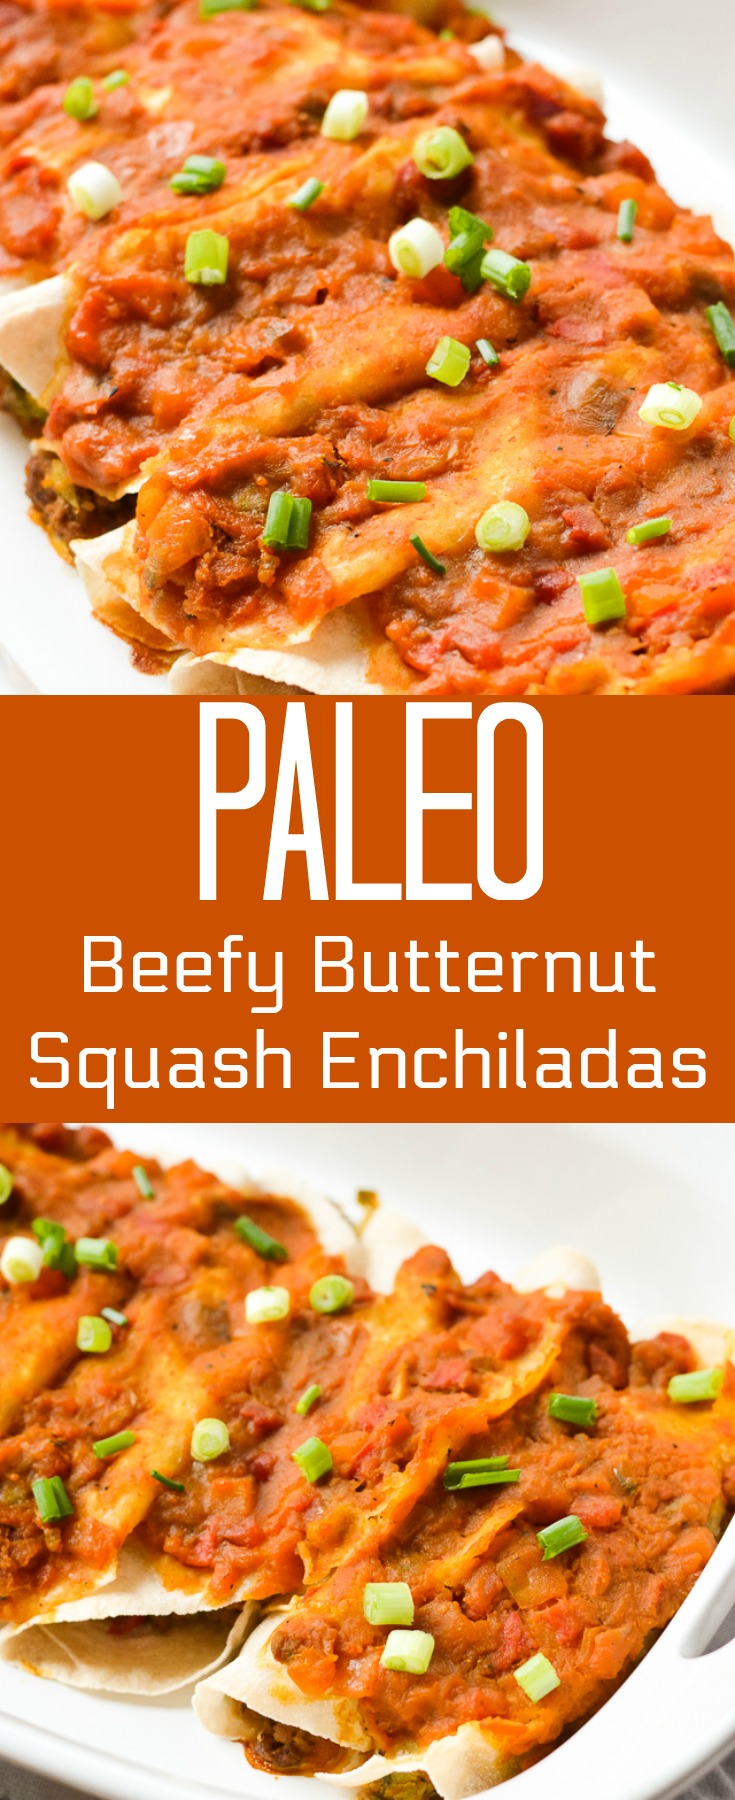 These Fall-inspired Paleo Beefy Butternut Squash Enchiladas are the perfect dinner recipe for Mexican night or for gluten-free meal prep during the busy work week!